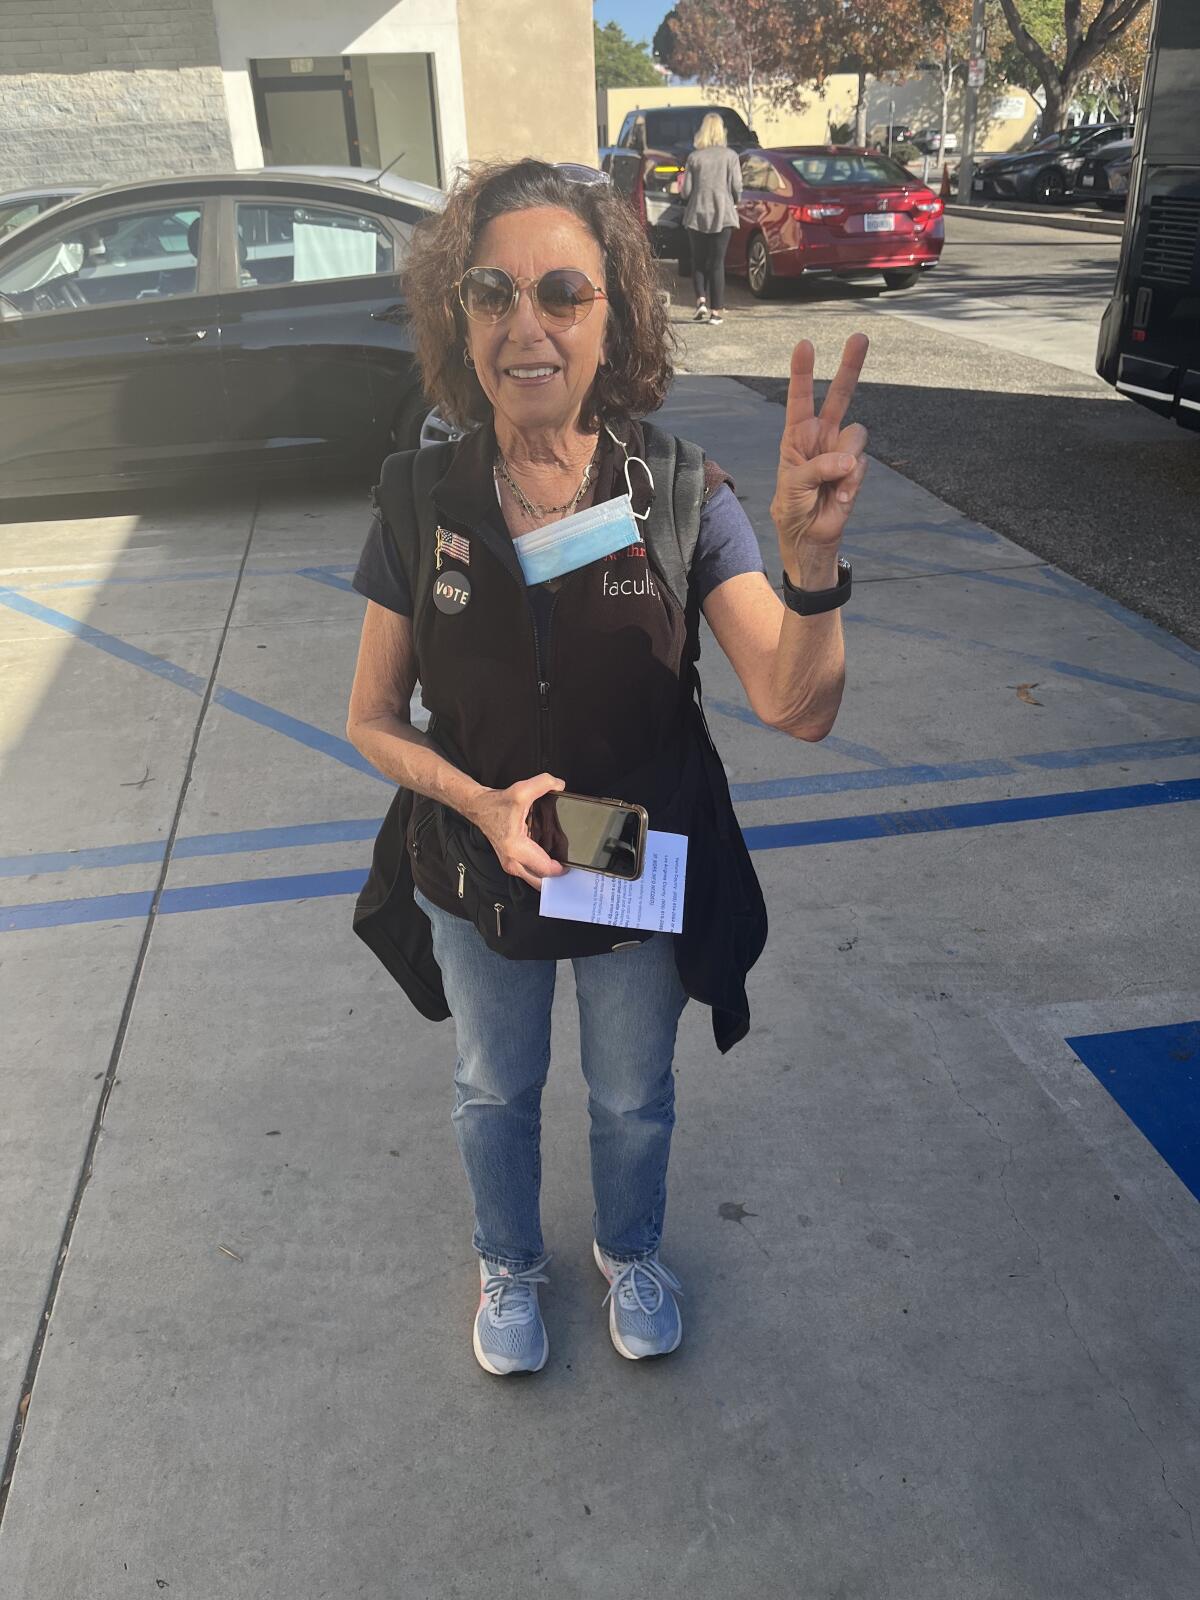 Terri Lisagor, a retired professor who lives in Camarillo, flashes a peace sign.